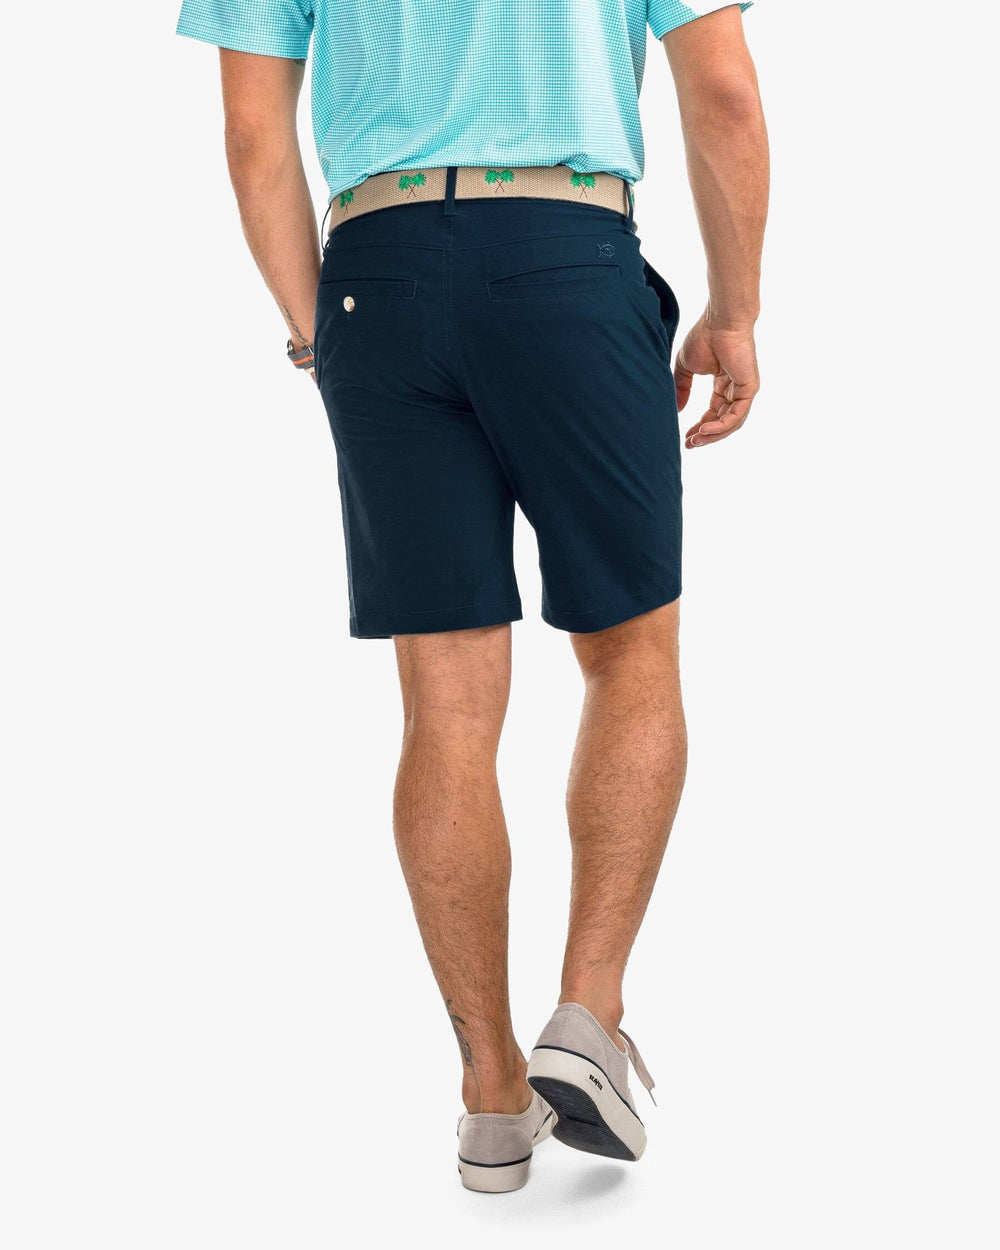 The back of the Men's T3 Gulf 9 Inch Performance Short by Southern Tide - True Navy